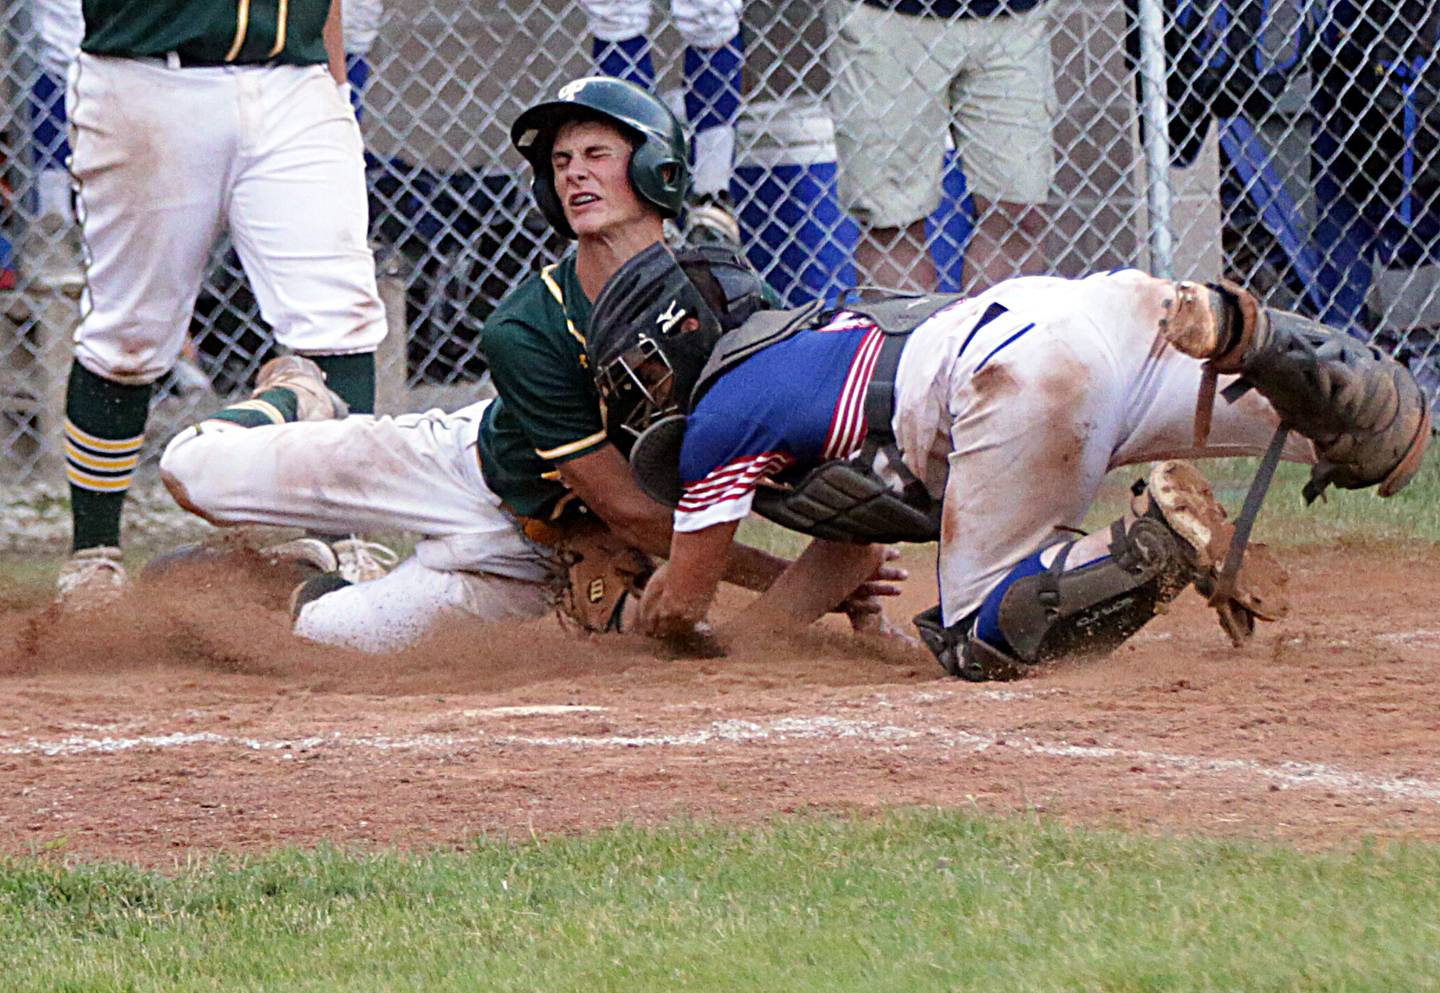 Newark's Lucas Pasakarnis tags out Grant Park’s Wesley Schneider at the plate in a 2021 sectional title game in Newark.